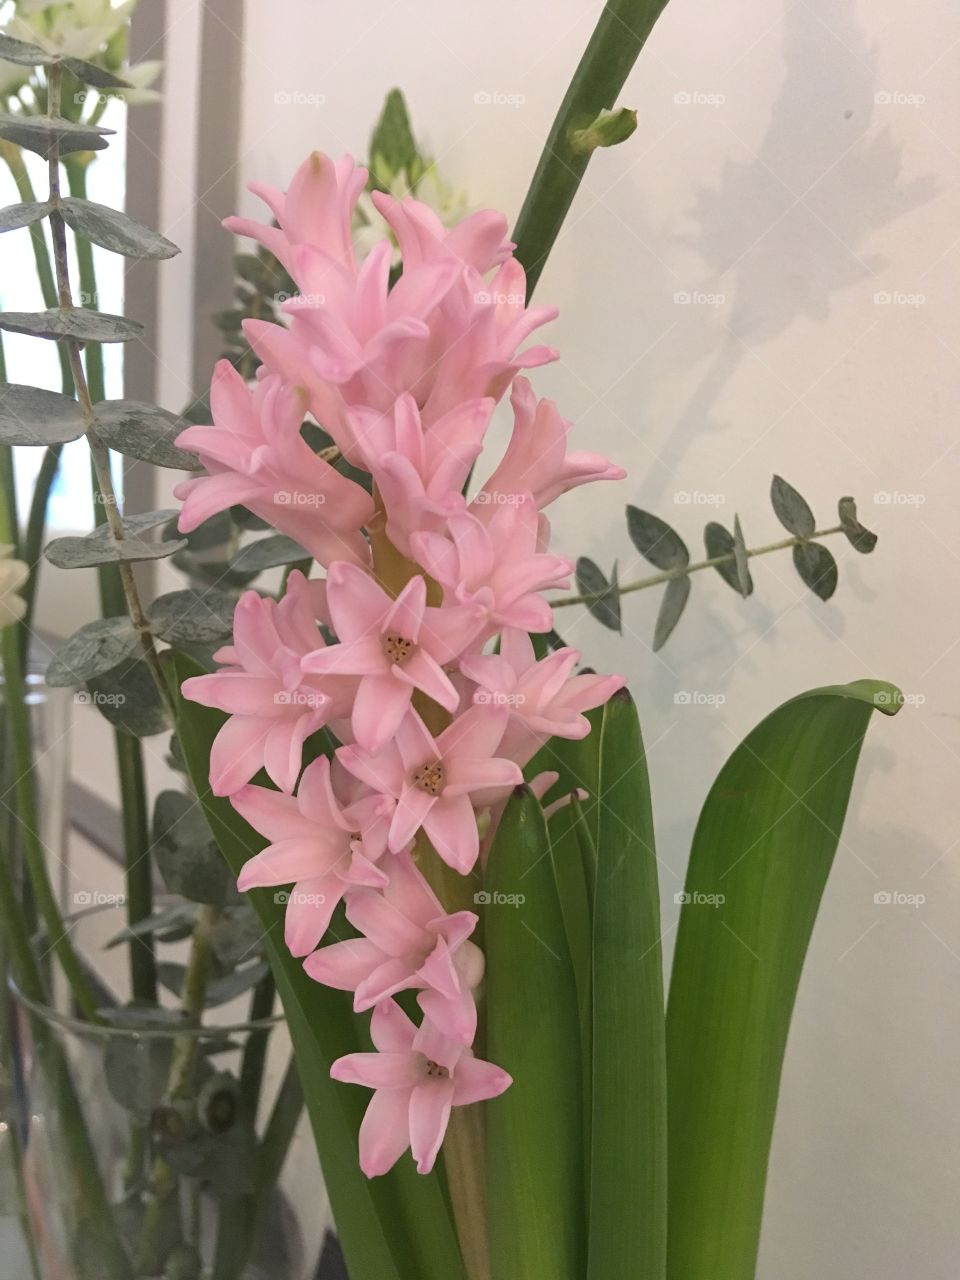 The pink hyacinth flower. Spring flowers background. Pink petals and green leaves of flowers close up. 